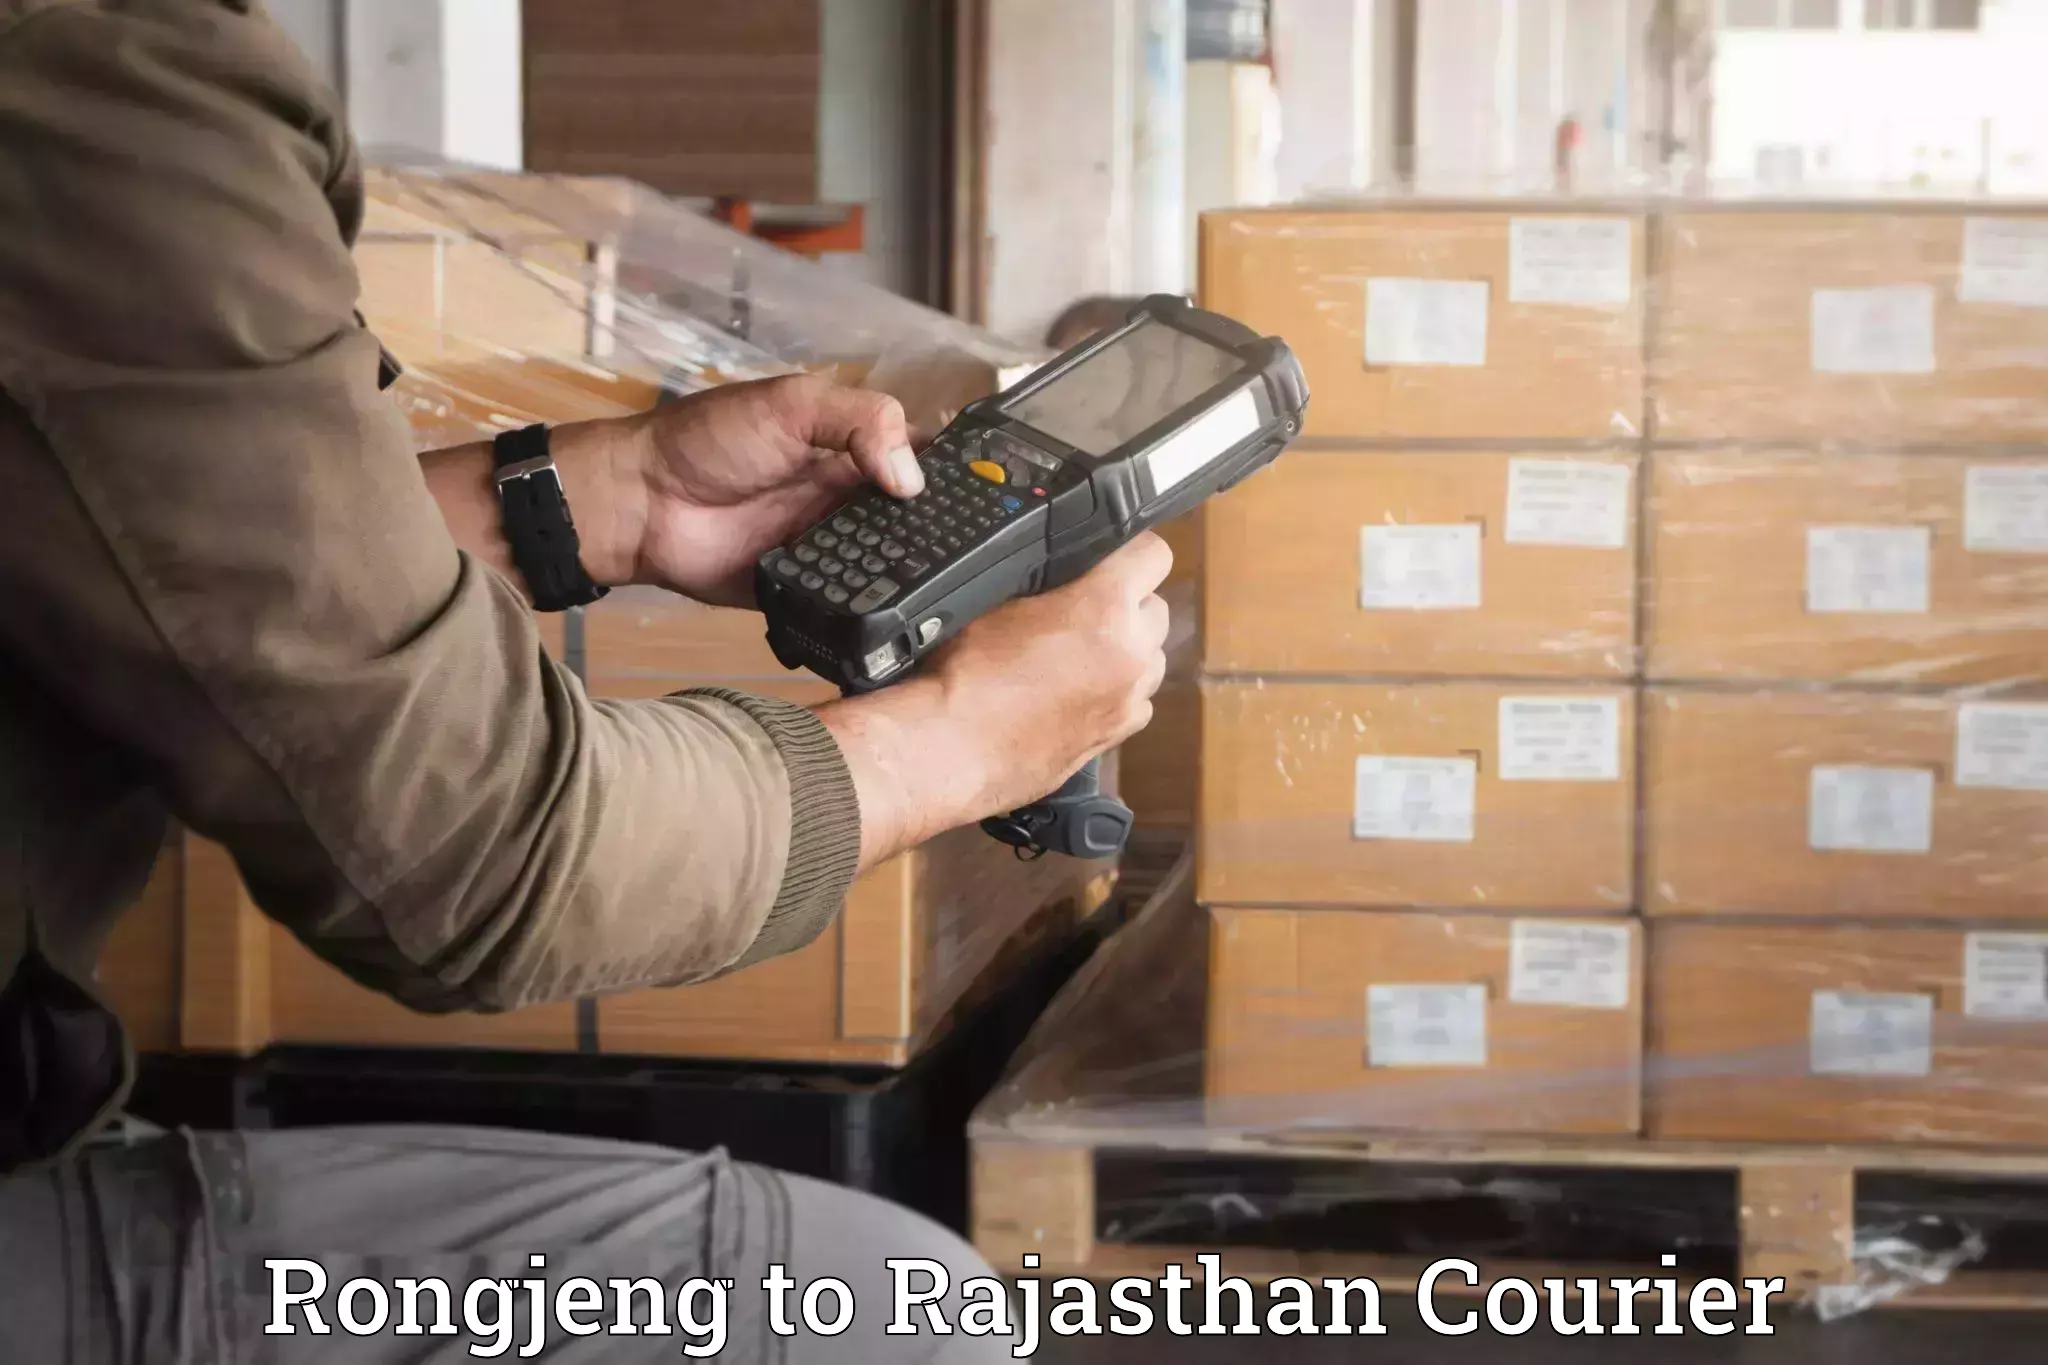 Professional movers Rongjeng to Rajasthan